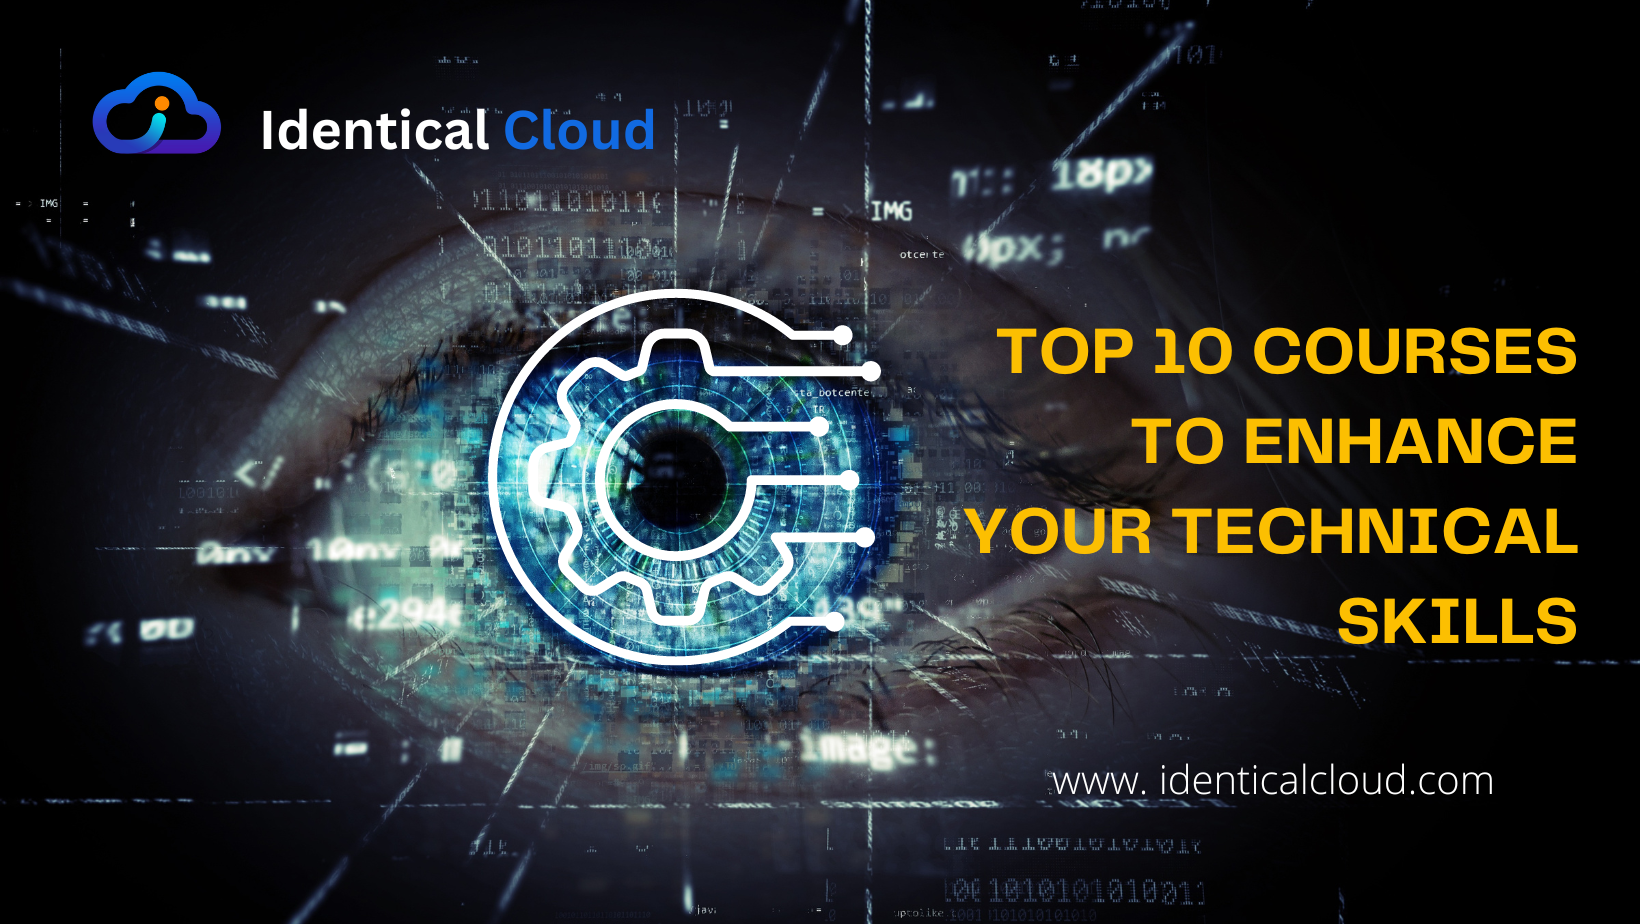 Top 10 Courses to Enhance Your Technical Skills - identicalcloud.com